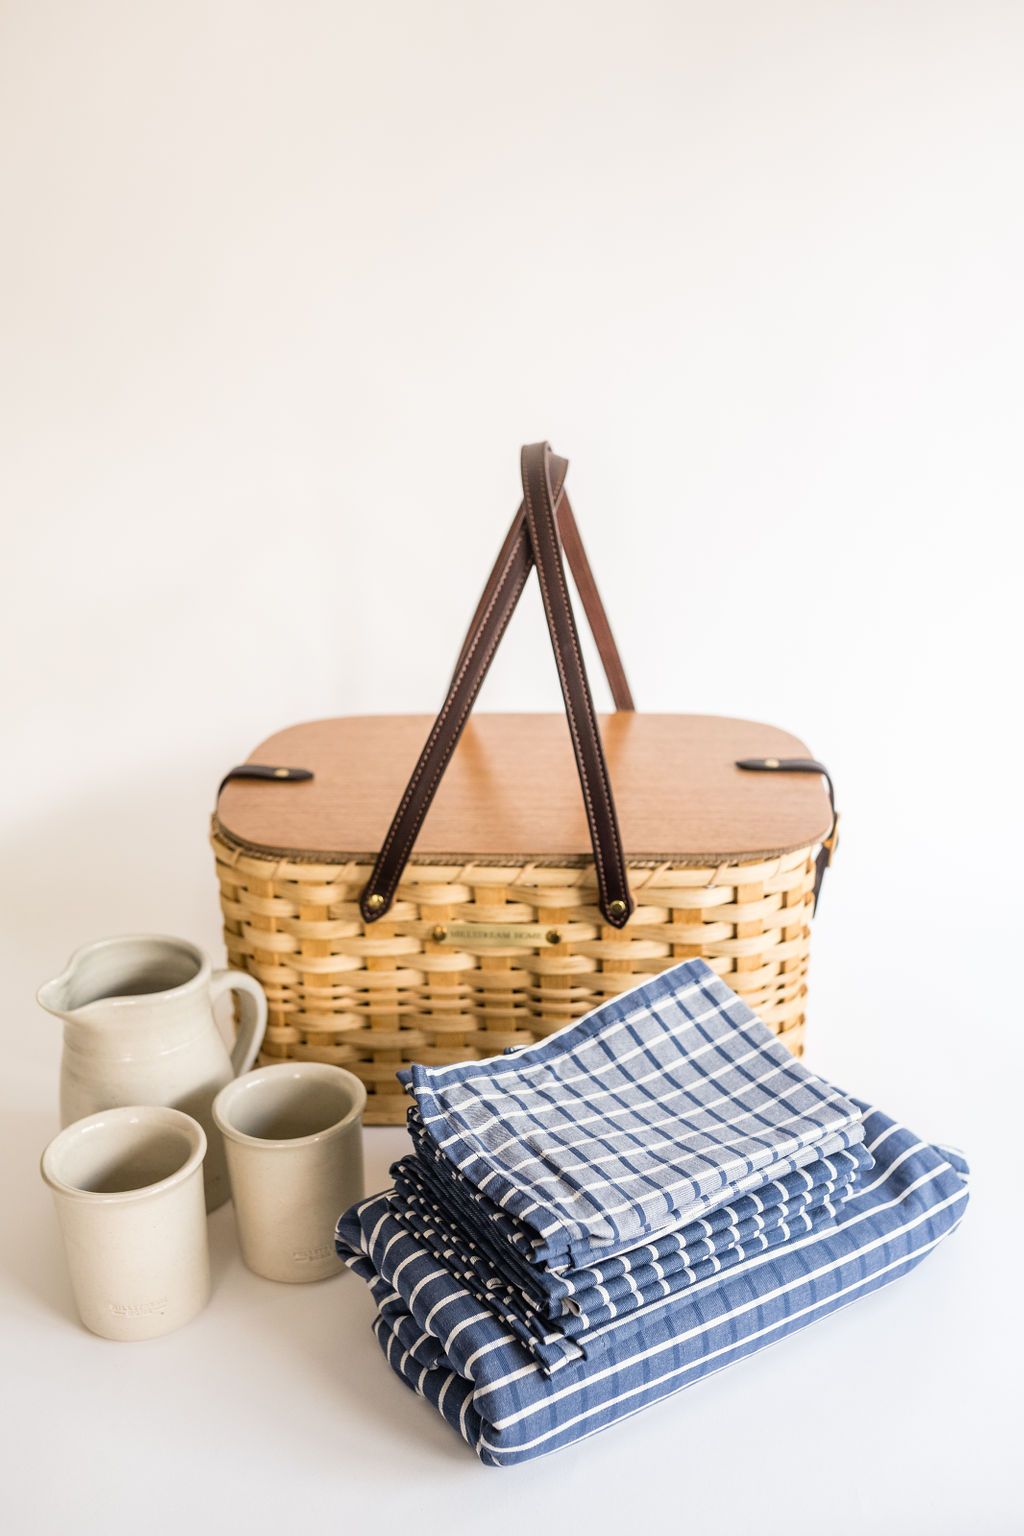 Cloth Napkins Folded on Top of Each Other Next to a Basket